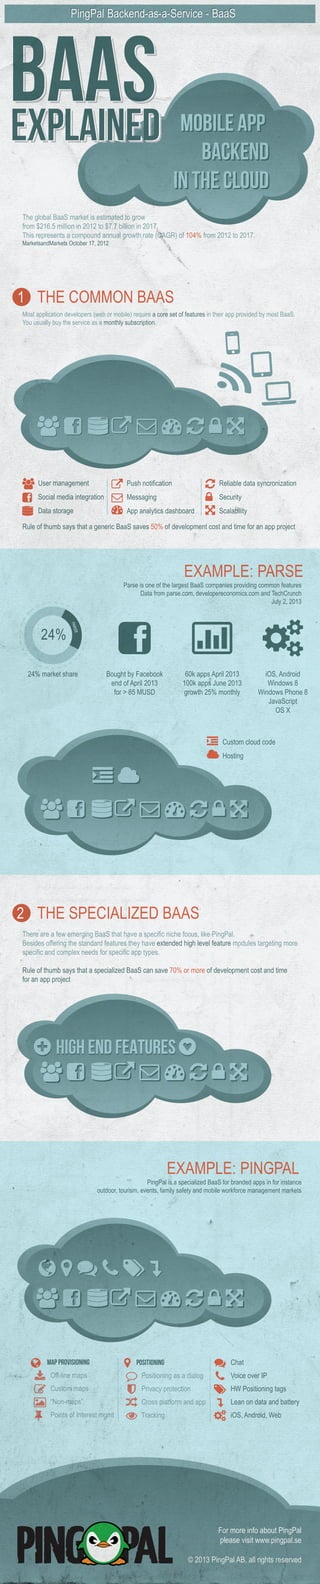 
2 THE SPECIALIZED BAAS
BAASBAASBAAS
PingPal Backend-as-a-Service - BaaSPingPal Backend-as-a-Service - BaaS
EXPLAINEDEXPLAINEDEXPLAINED MOBILE APP
BACKEND
IN THE CLOUD
MOBILE APP
BACKEND
IN THE CLOUD
1 THE COMMON BAAS
Most application developers (web or mobile) require a core set of features in their app provided by most BaaS.
You usually buy the service as a monthly subscription.

Reliable data syncronization
Security
Scalability
Rule of thumb says that a generic BaaS saves 50% of development cost and time for an app project

User management
Social media integration
Data storage
Push notification
Messaging
App analytics dashboard
The global BaaS market is estimated to grow
from $216.5 million in 2012 to $7.7 billion in 2017.
This represents a compound annual growth rate (CAGR) of 104% from 2012 to 2017.
MarketsandMarkets October 17, 2012
EXAMPLE: PARSE
Parse is one of the largest BaaS companies providing common features
Data from parse.com, developereconomics.com and TechCrunch
July 2, 2013
PARSE
24%
24% market share Bought by Facebook
end of April 2013
for > 85 MUSD
|
60k apps April 2013
100k apps June 2013
growth 25% monthly
iOS, Android
Windows 8
Windows Phone 8
JavaScript
OS X
Custom cloud code
Hosting
There are a few emerging BaaS that have a specific niche focus, like PingPal.
Besides offering the standard features they have extended high level feature modules targeting more
specific and complex needs for specific app types.
Rule of thumb says that a specialized BaaS can save 70% or more of development cost and time
for an app project

+ High end features+ High end features

EXAMPLE: PINGPAL
PingPal is a specialized BaaS for branded apps in for instance
outdoor, tourism, events, family safety and mobile workforce management markets
Chat
Voice over IP
HW Positioning tags
Lean on data and battery
iOS, Android, Web
Map provisioning
Off-line maps
Custom maps
“Non-maps”
Points of Interest mgmt
Positioning
Positioning as a dialog
Privacy protection
Cross platform and app
Tracking
For more info about PingPal
please visit www.pingpal.se
© 2013 PingPal AB, all rights reserved
 